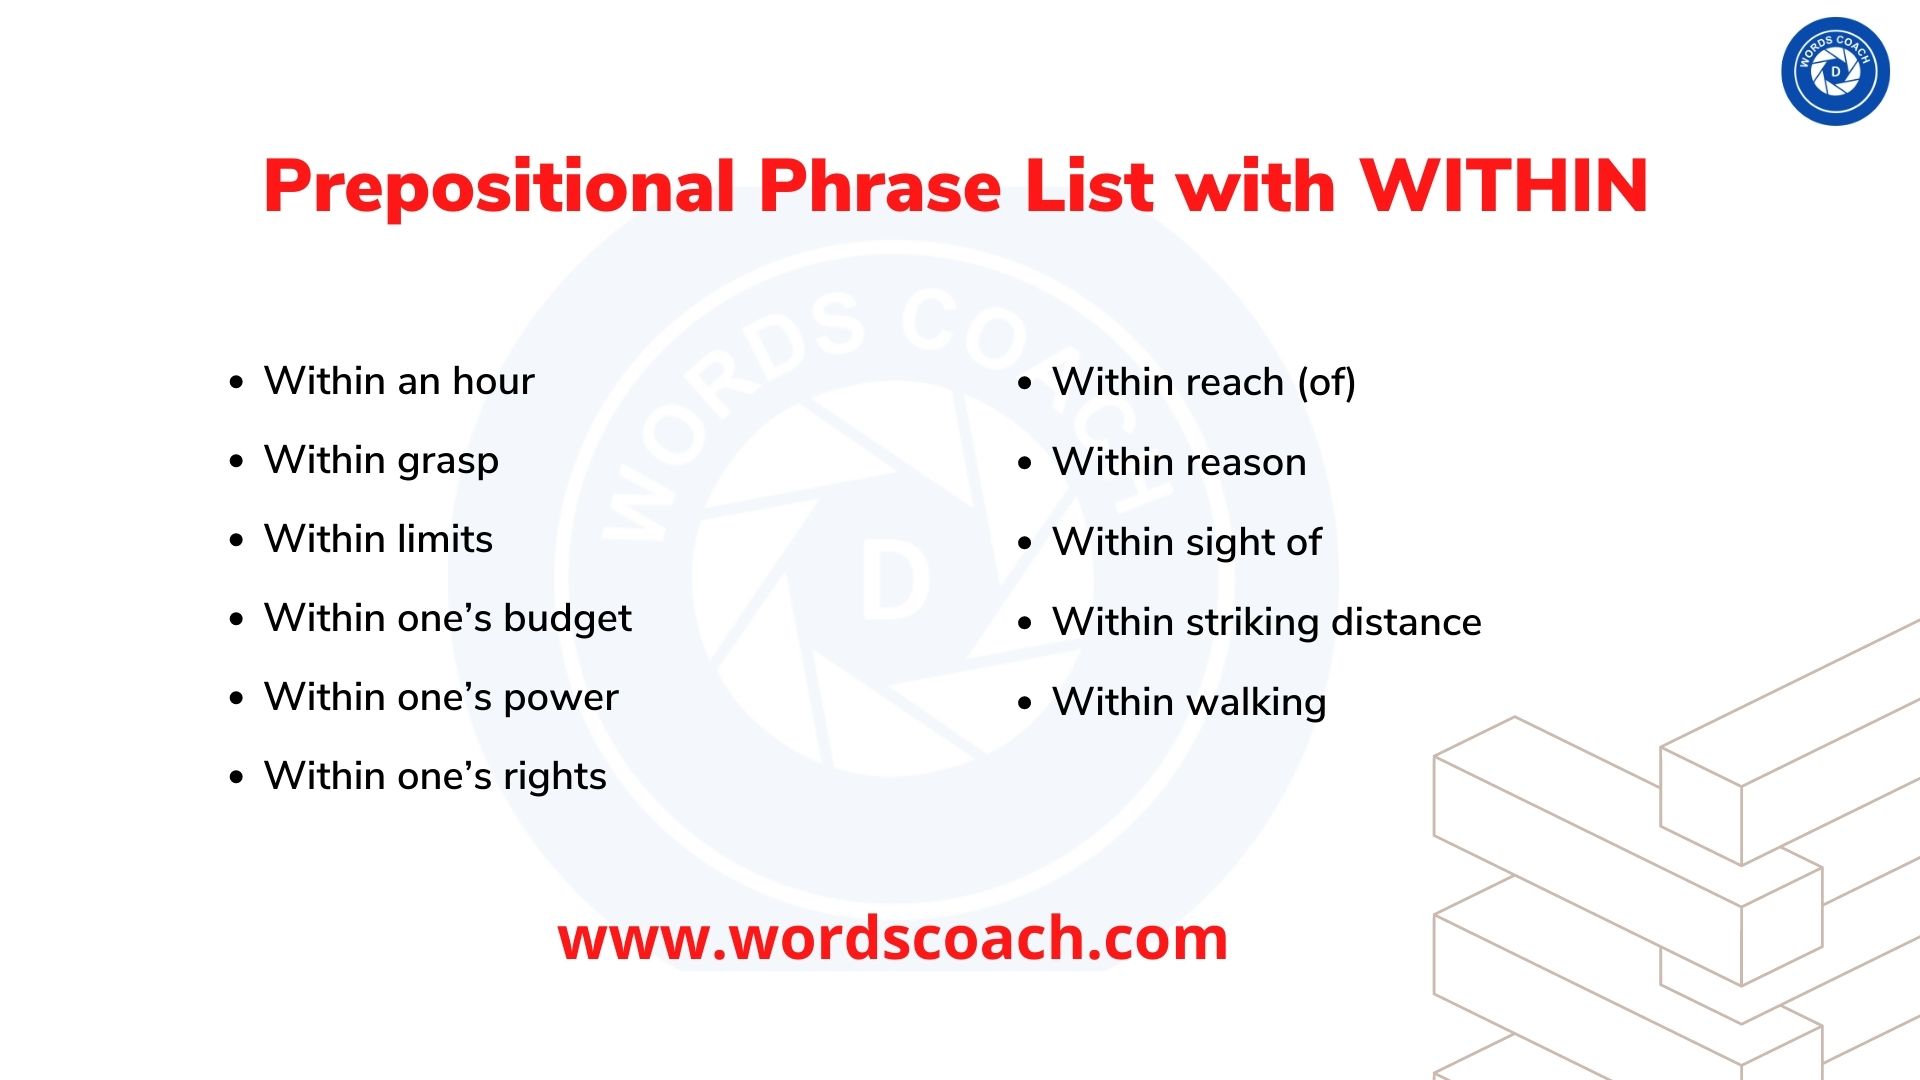 Prepositional Phrase List with WITHIN - wordscoach.com